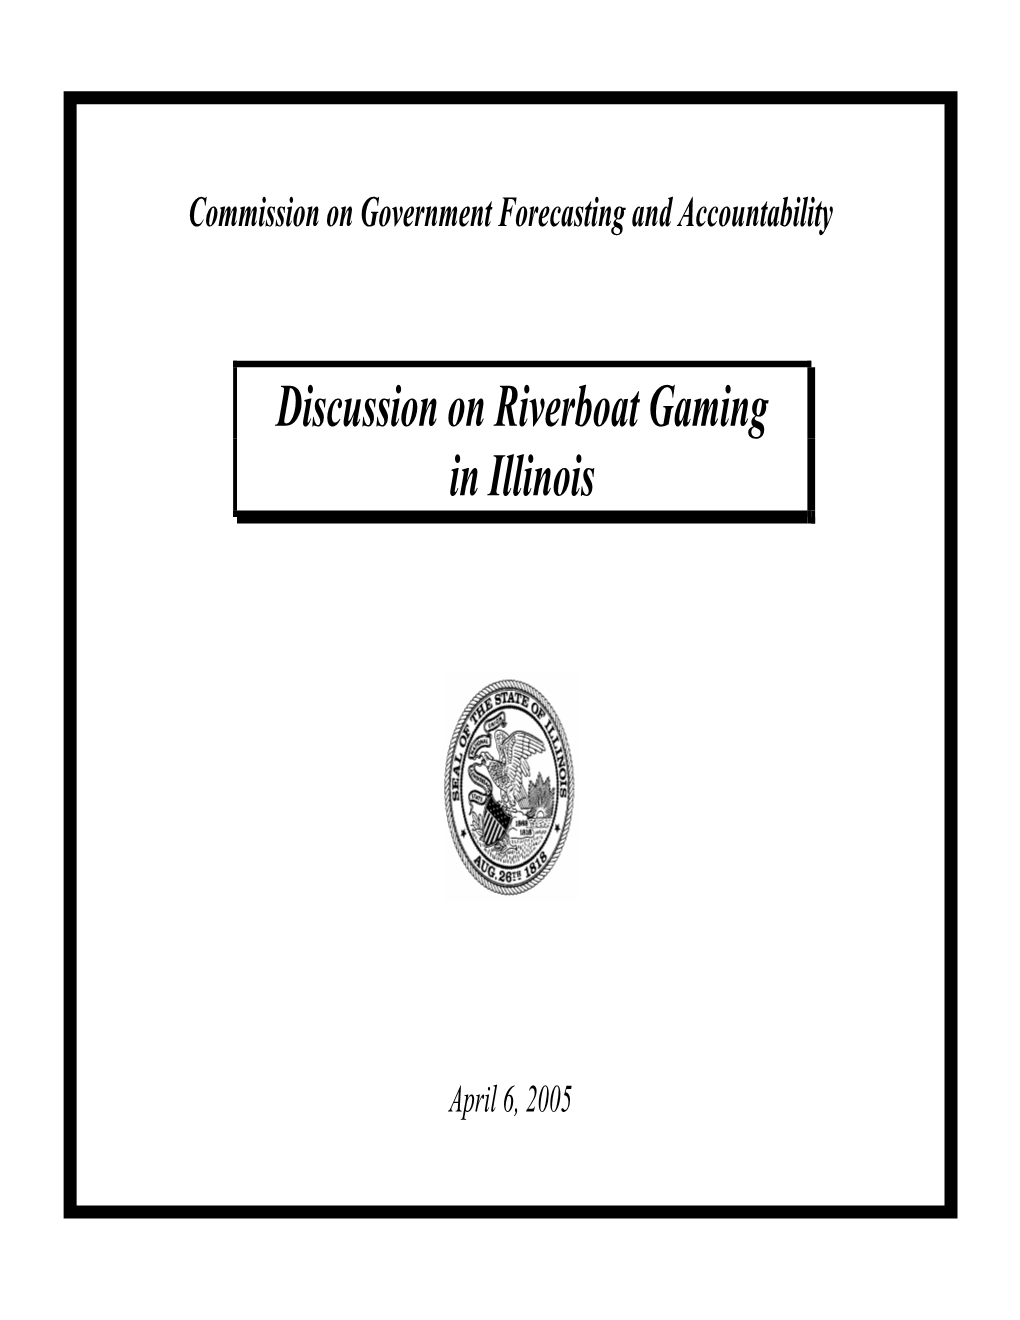 Discussion on Riverboat Gaming in Illinois